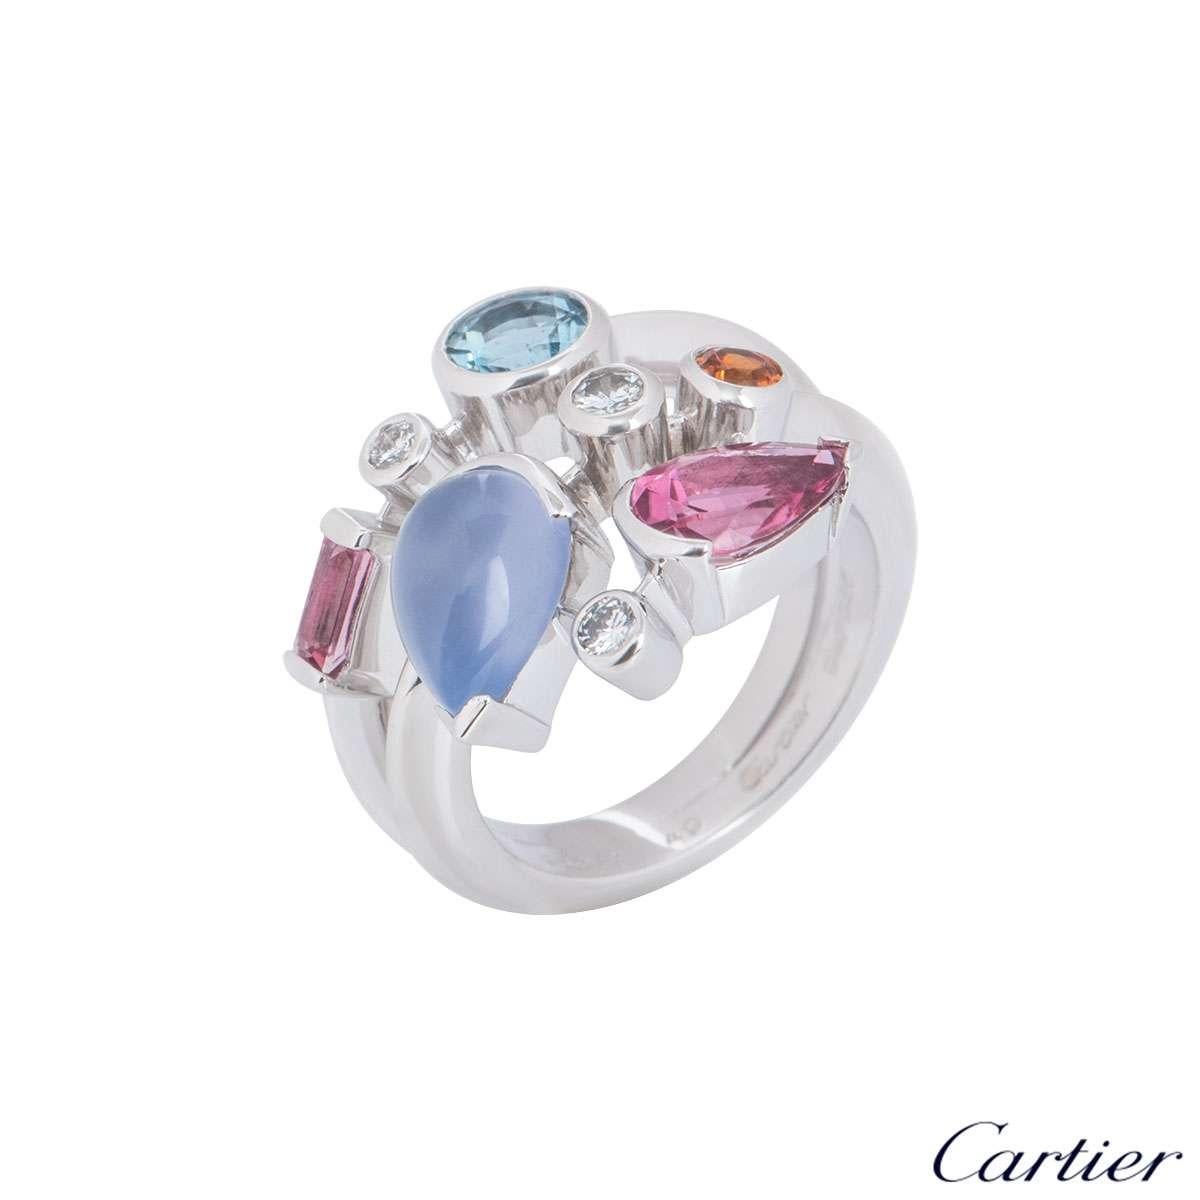 A platinum Cartier diamond and multi-gemstone ring from the Meli Melo collection. The ring comprises of 8 gemstones abstractly placed over 3 rows, consisting of diamonds, aquamarine, chalcedony, garnet and pink tourmaline. There are 3 round